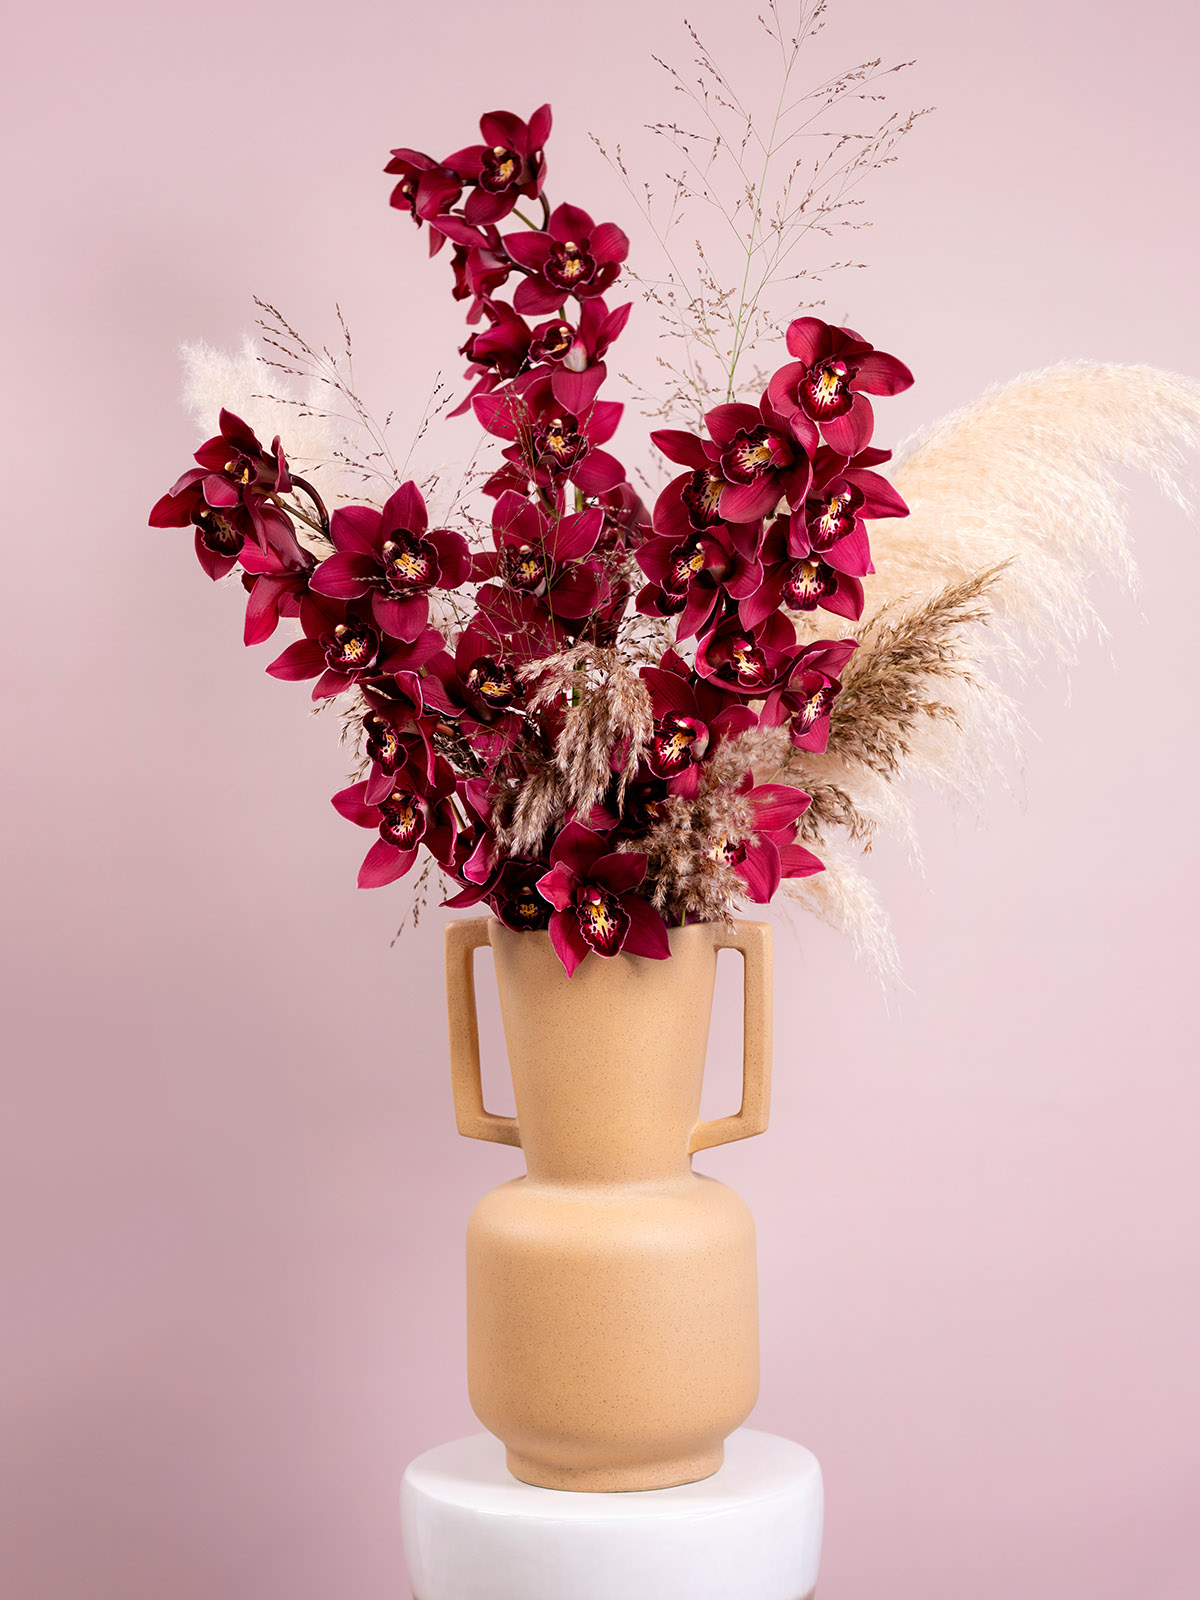 Red Cymbidum bouquet by Alain Poot on Thursd